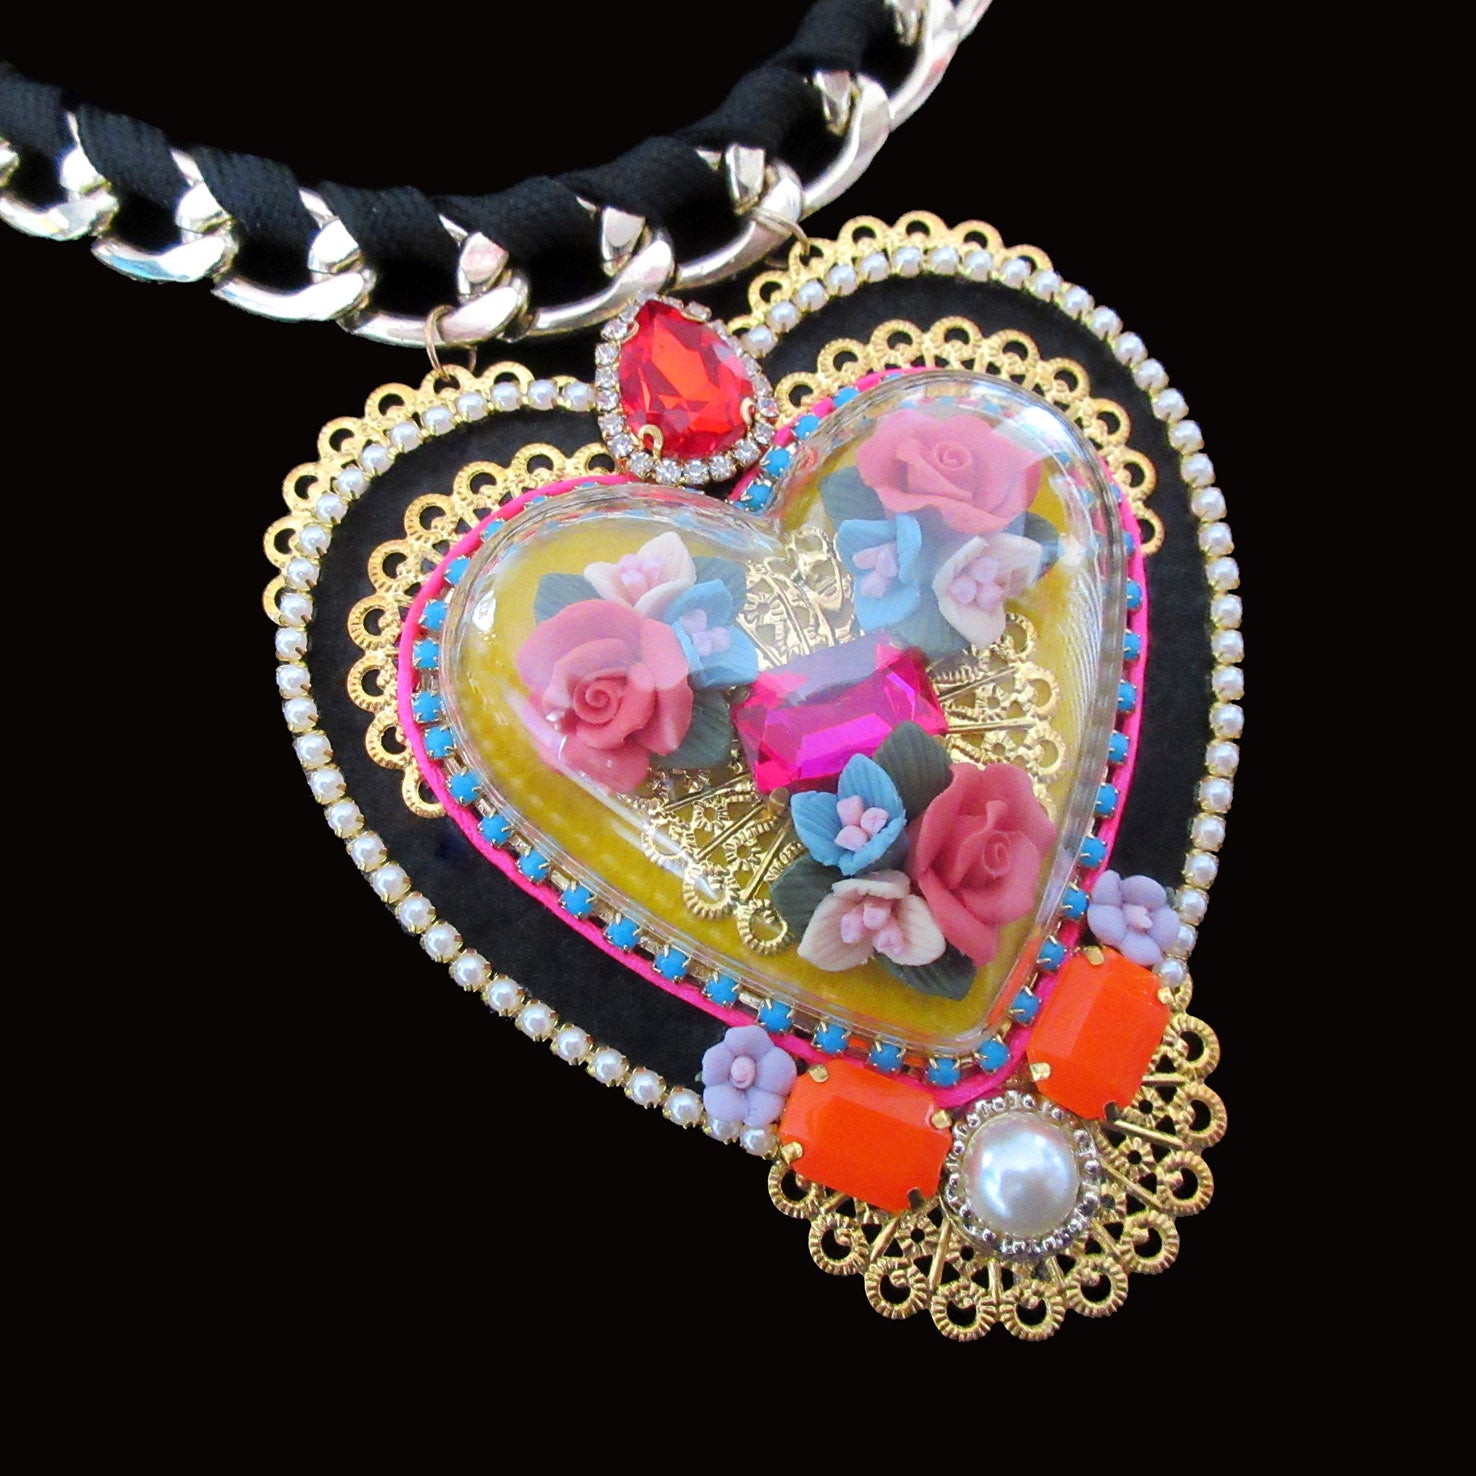 mouchkine jewelry chic and trendy handmade necklace with a heart shape